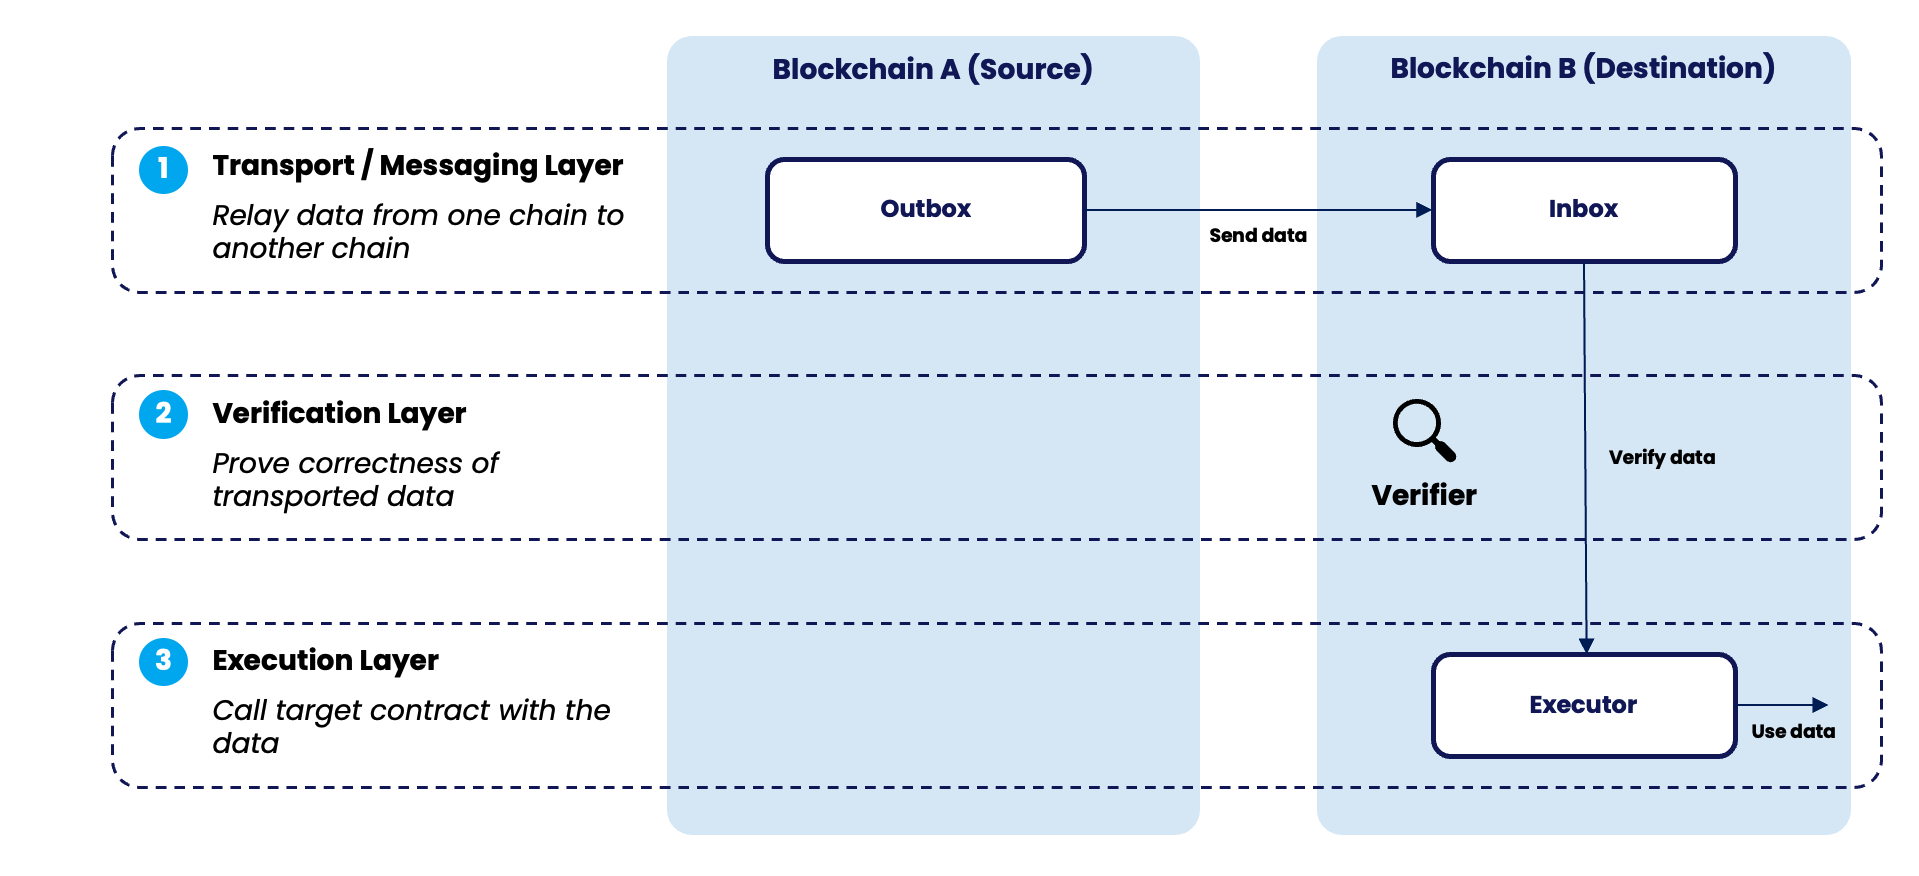 Source: The Messaging Bridge Stack adapted from Connext